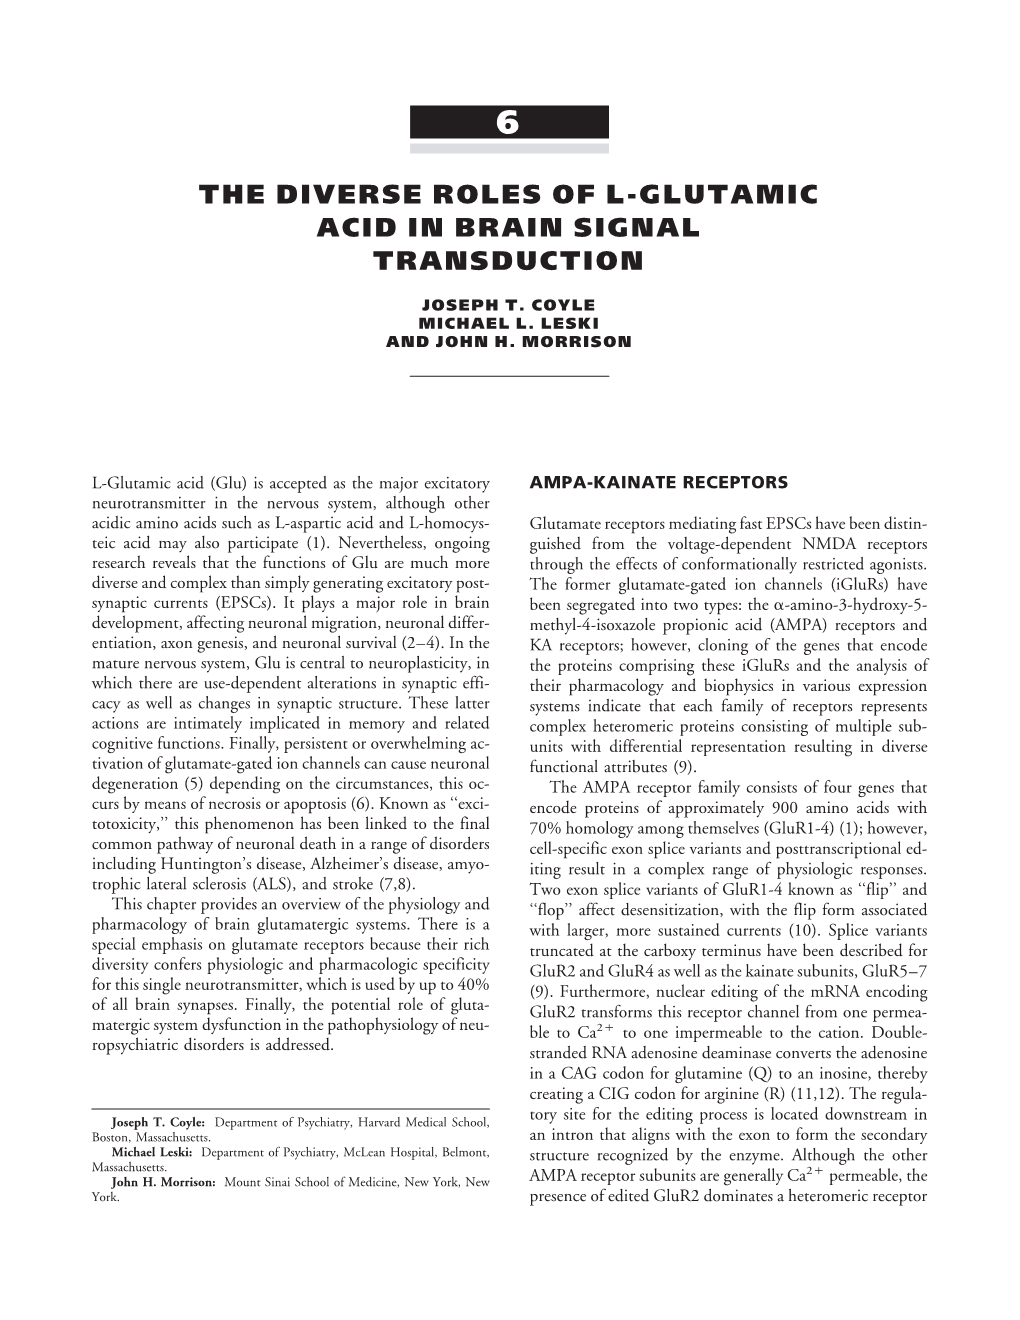 Chapter 6: the Diverse Roles of L-Glutamic Acid in Brain